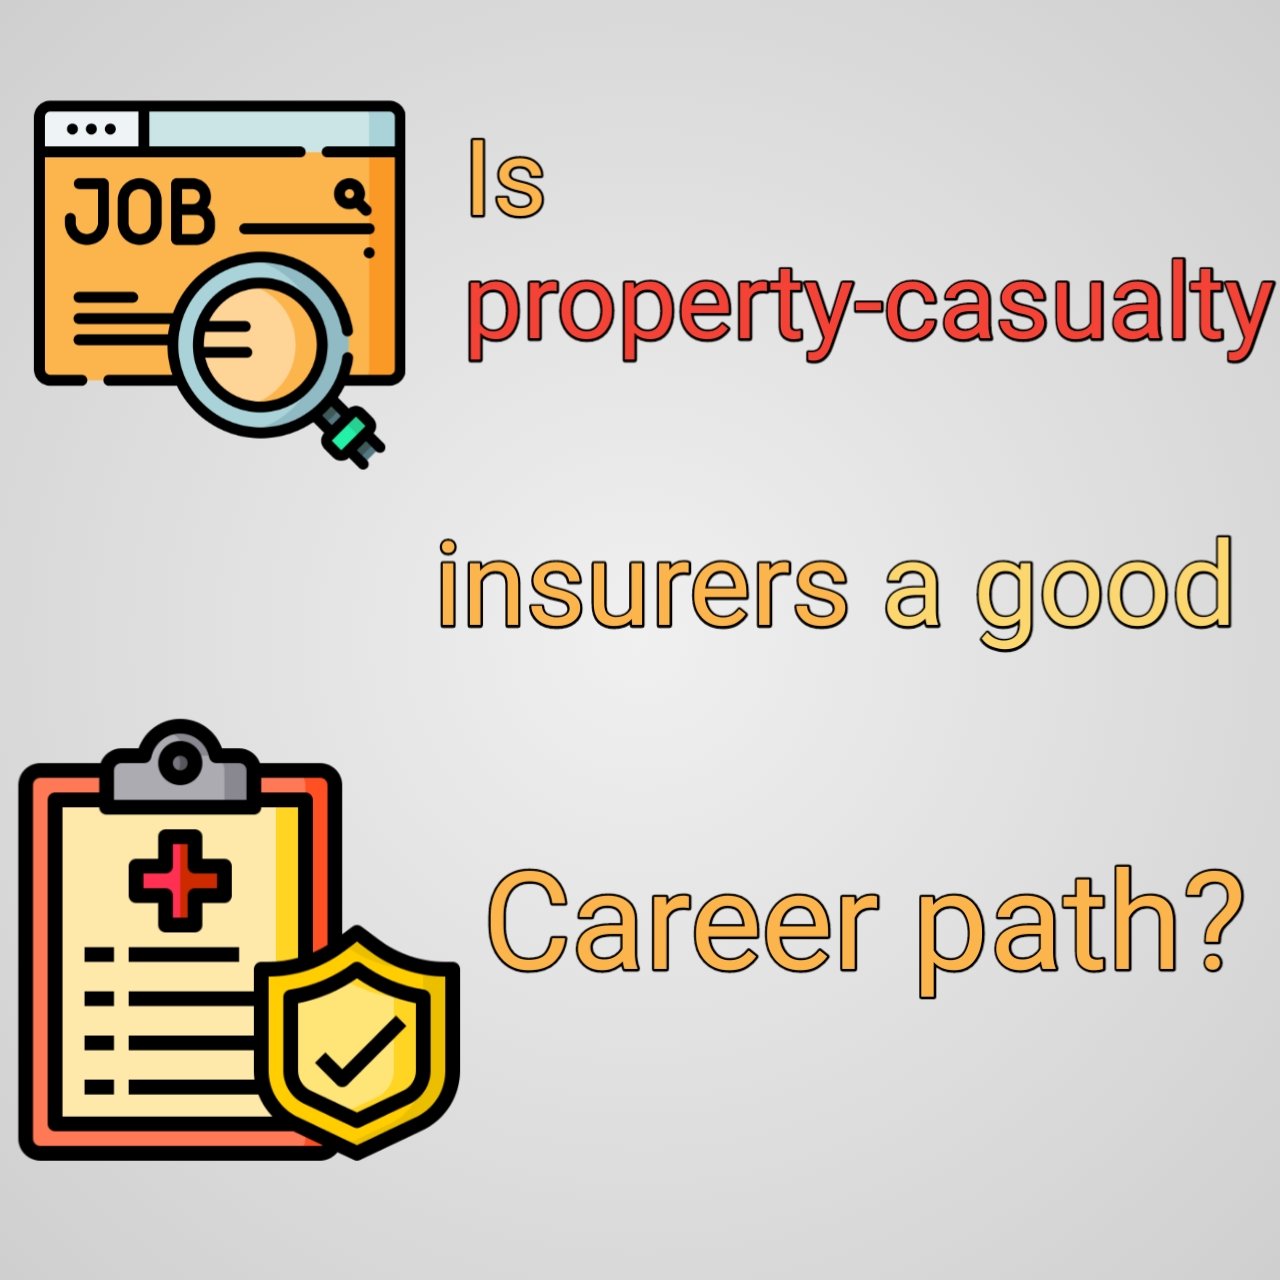 Is property-casualty insurers a good career path?